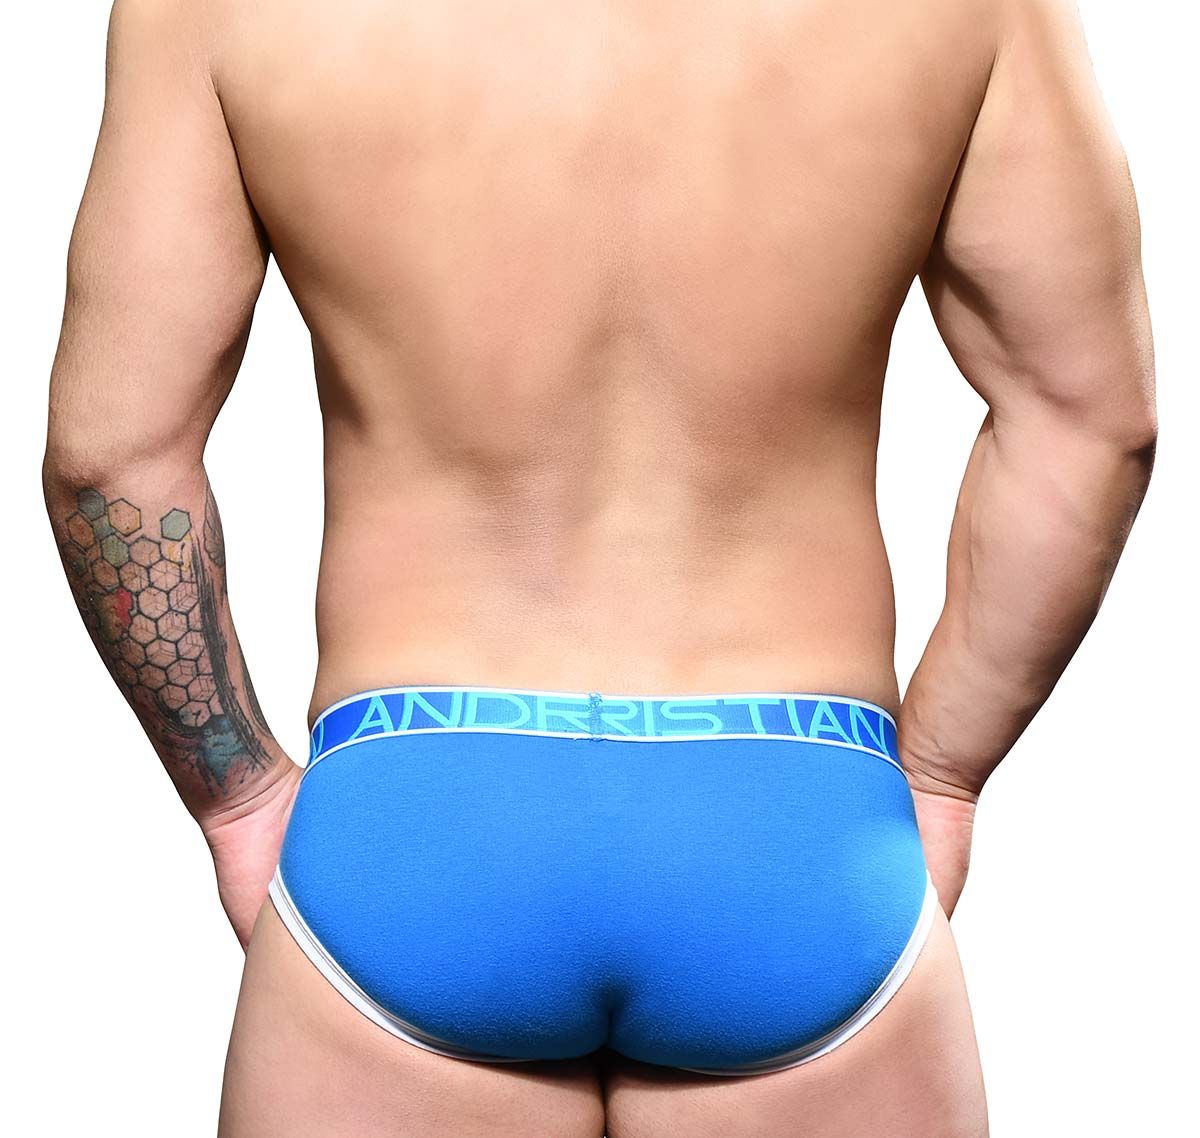 Andrew Christian Brief FLY TAGLESS BRIEF w/ ALMOST NAKED 92187, blue